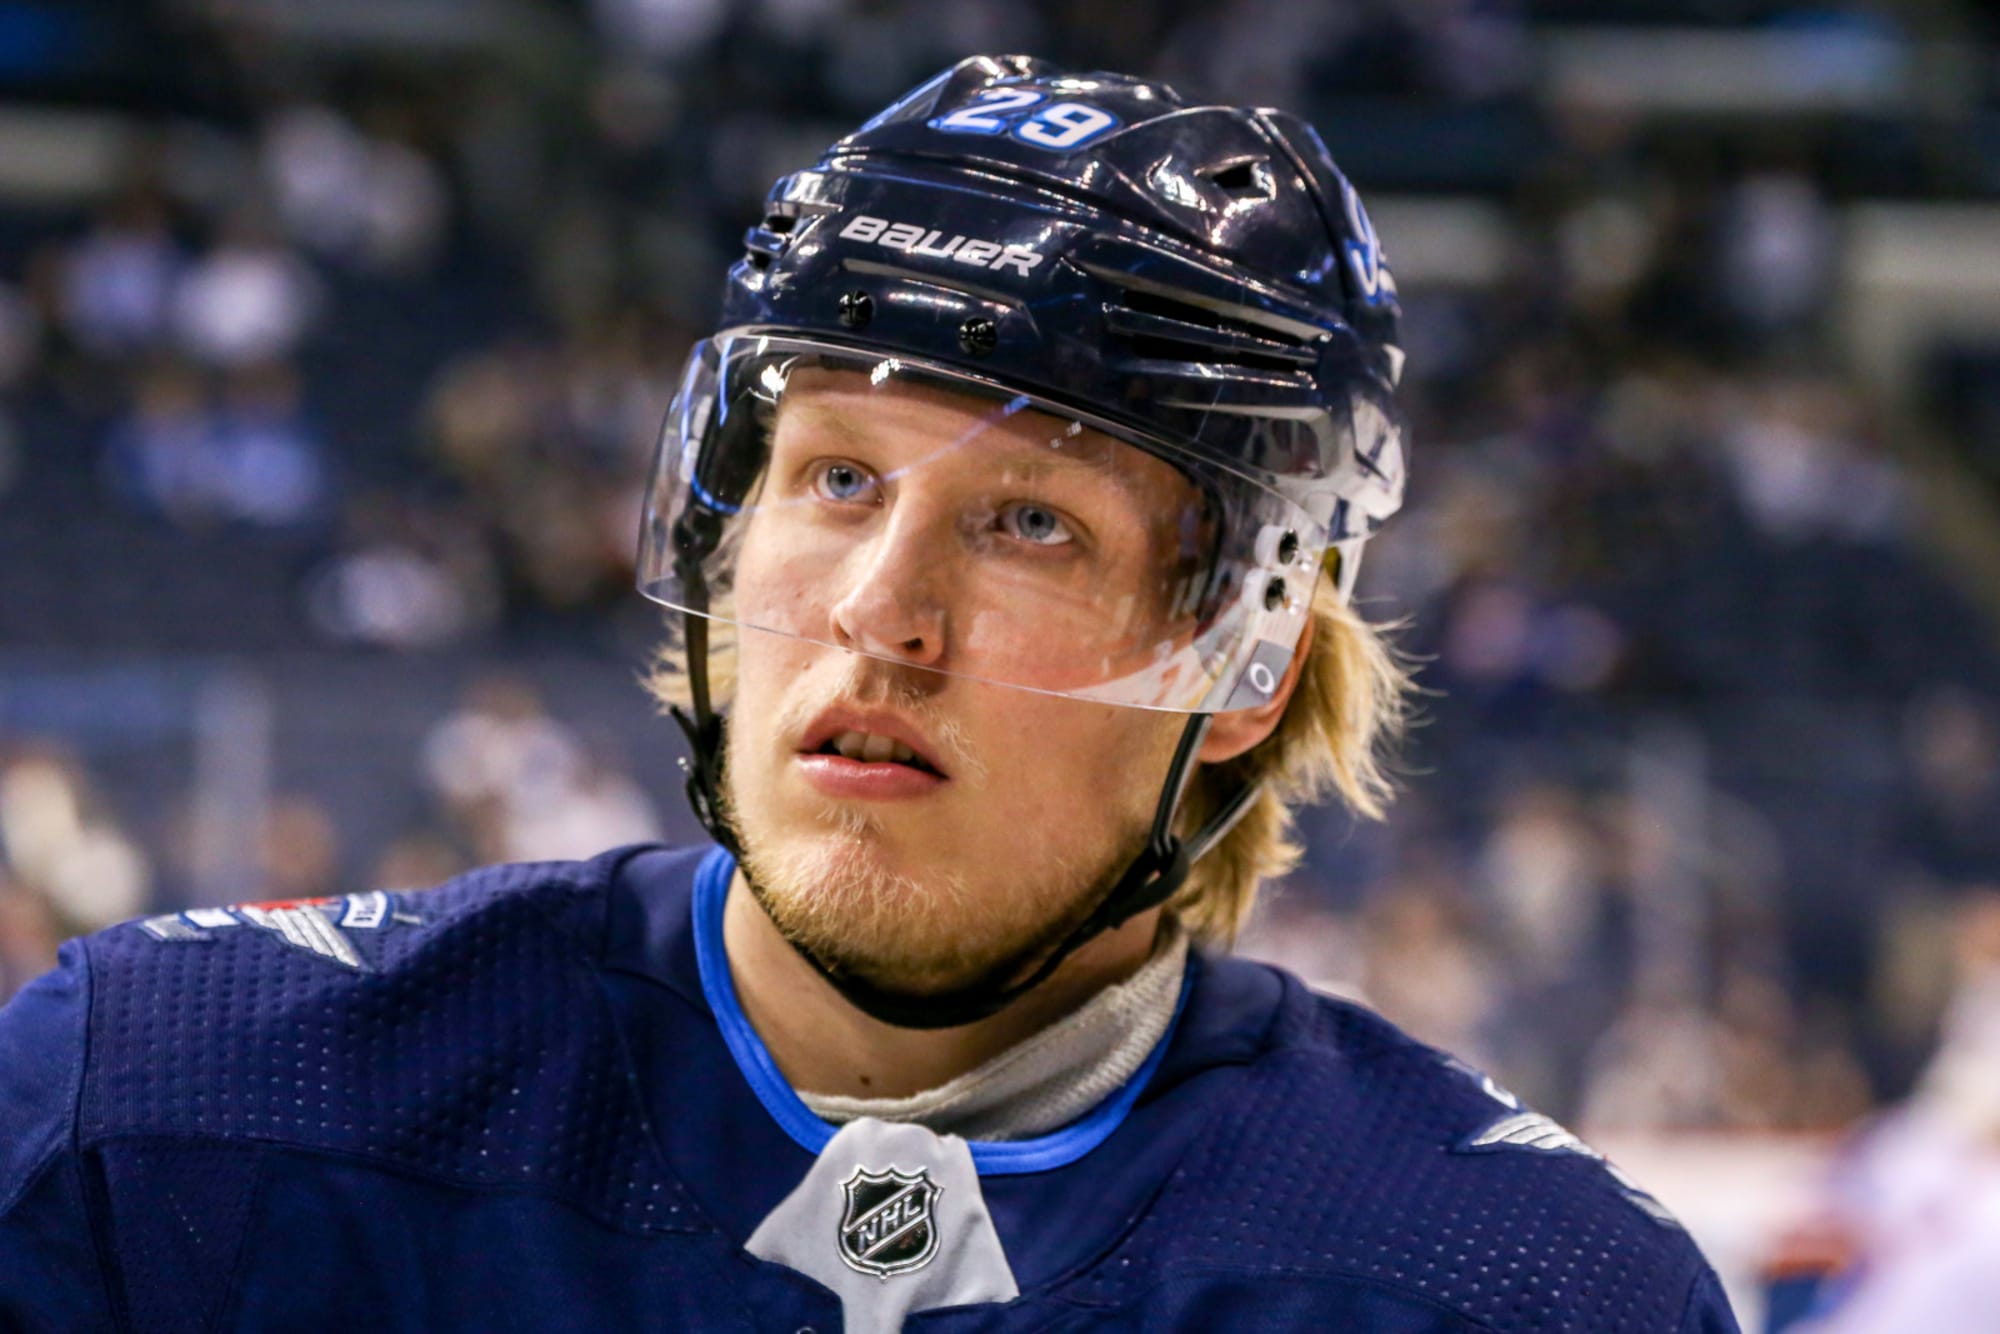 Winnipeg Jets: Patrik Laine's Video Game Beard is a Far Cry from Reality